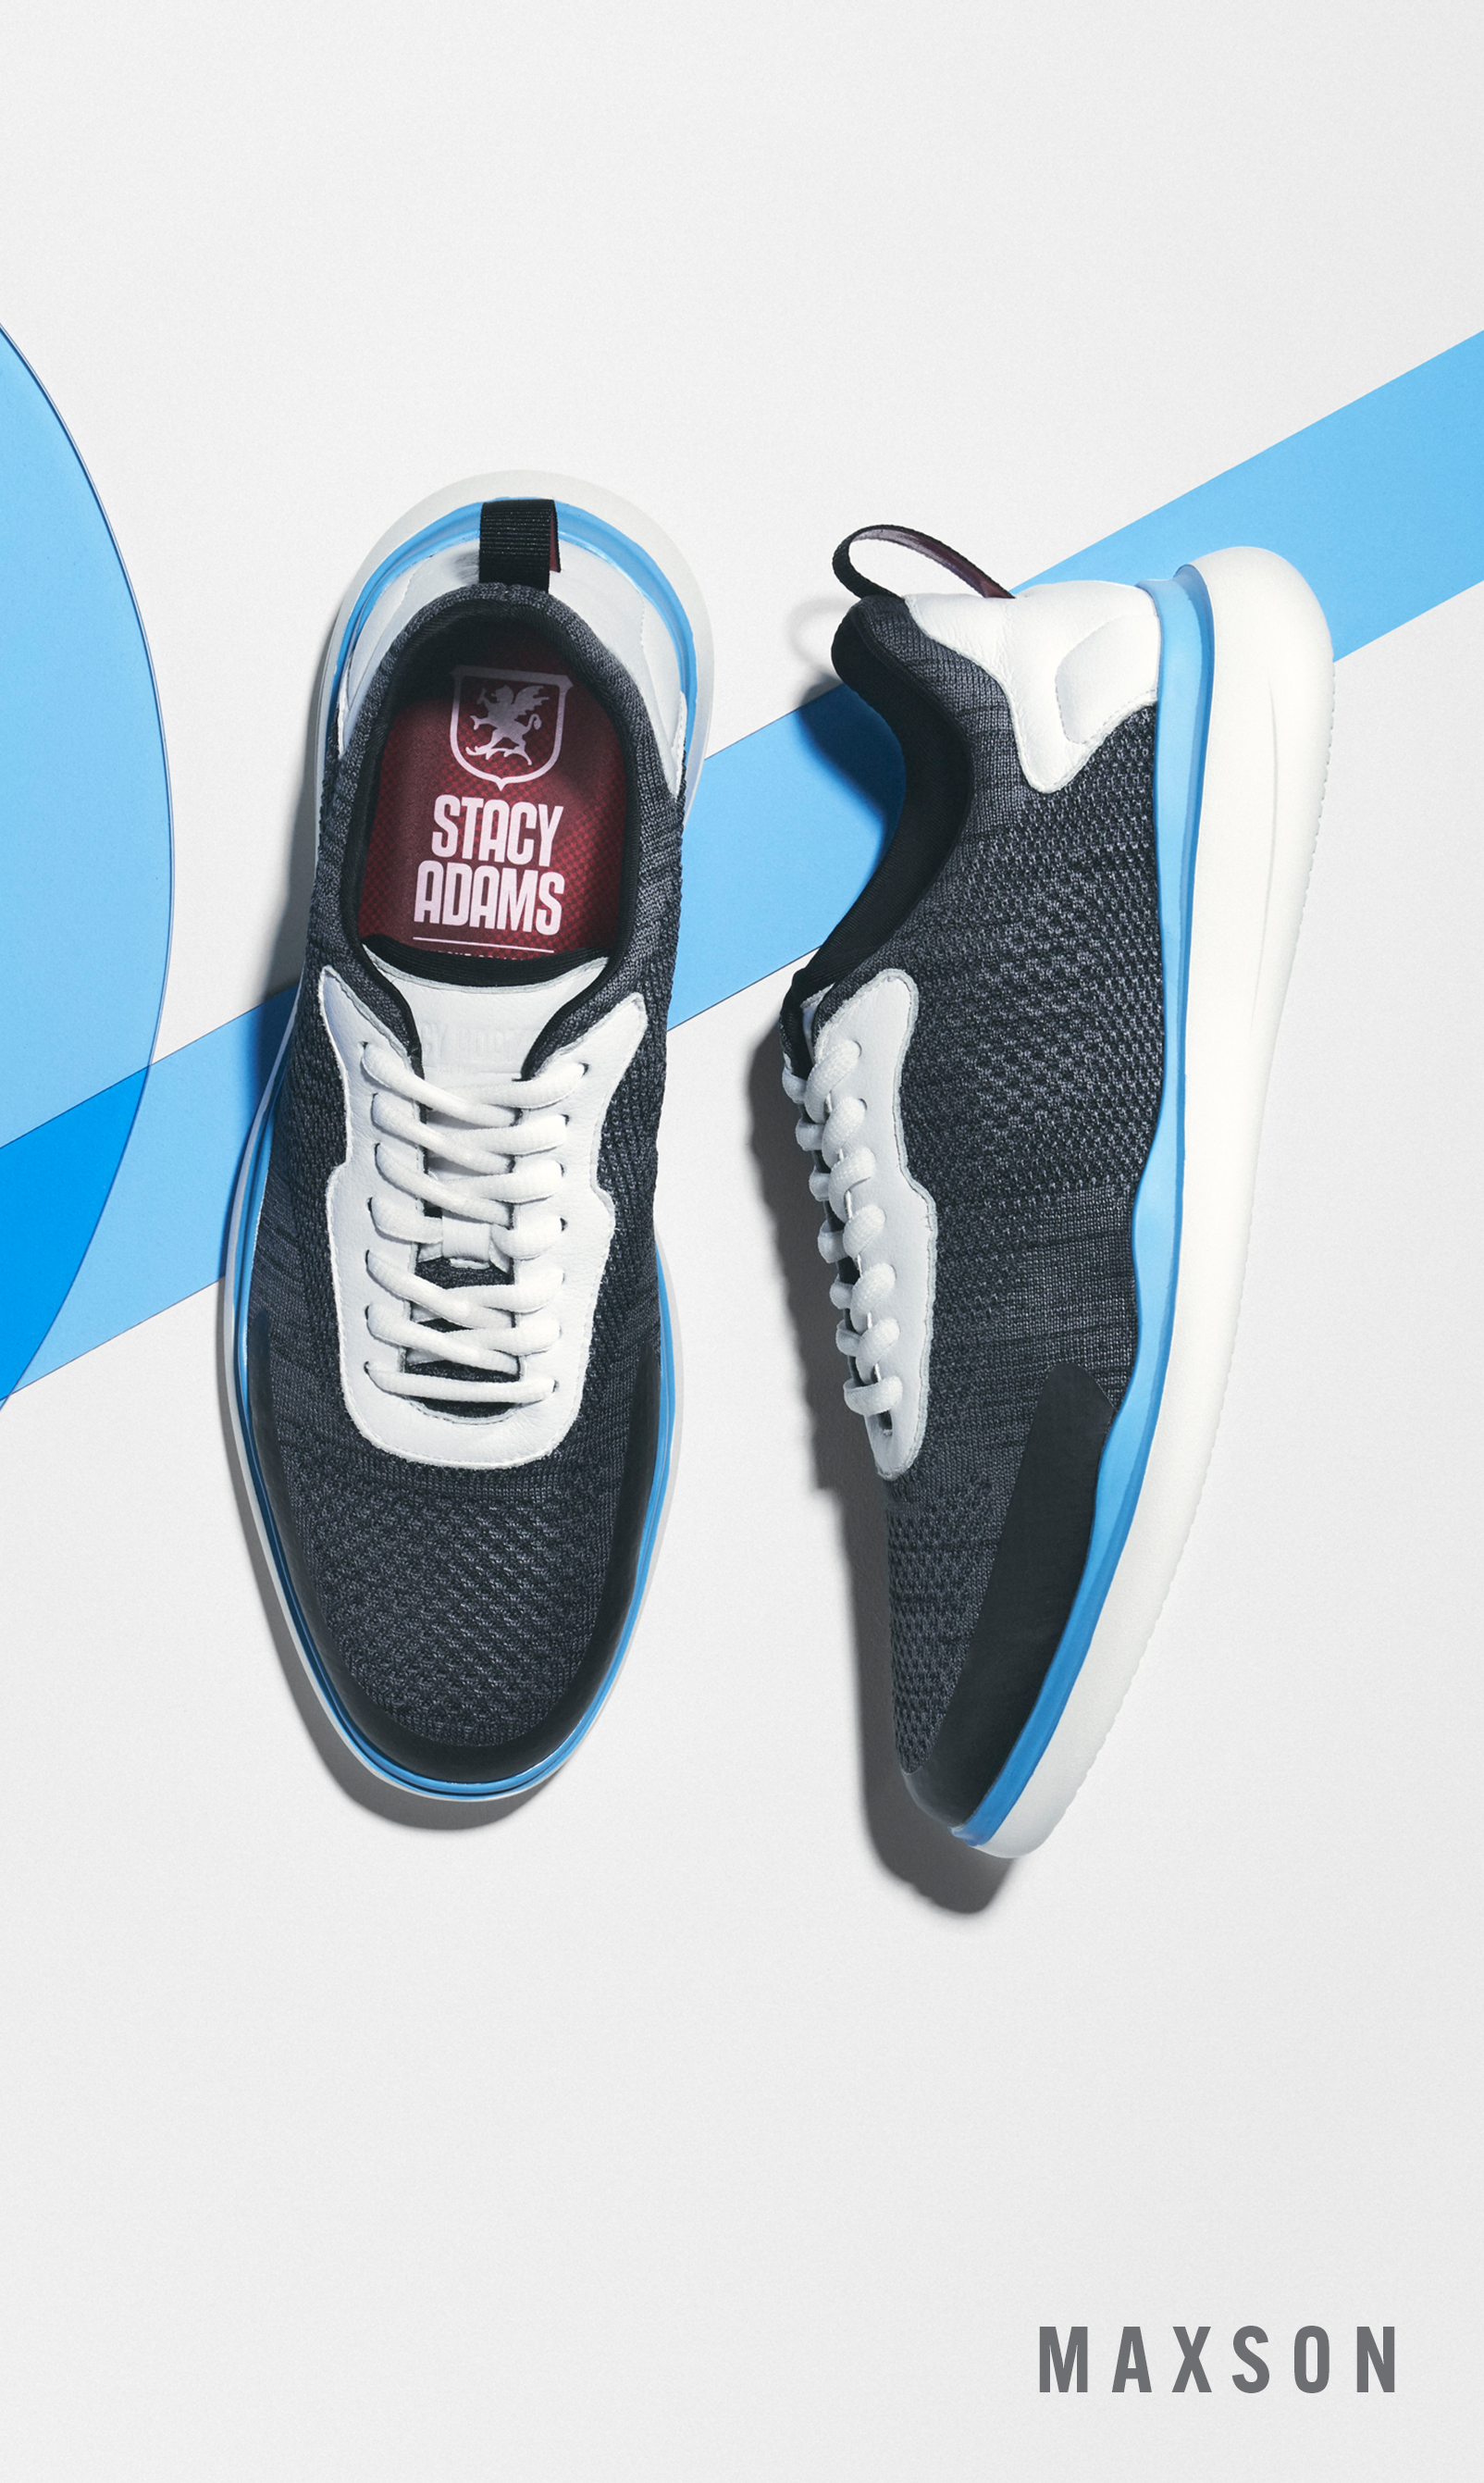 RedZone Collection category. Image features the Maxson sneaker in black.